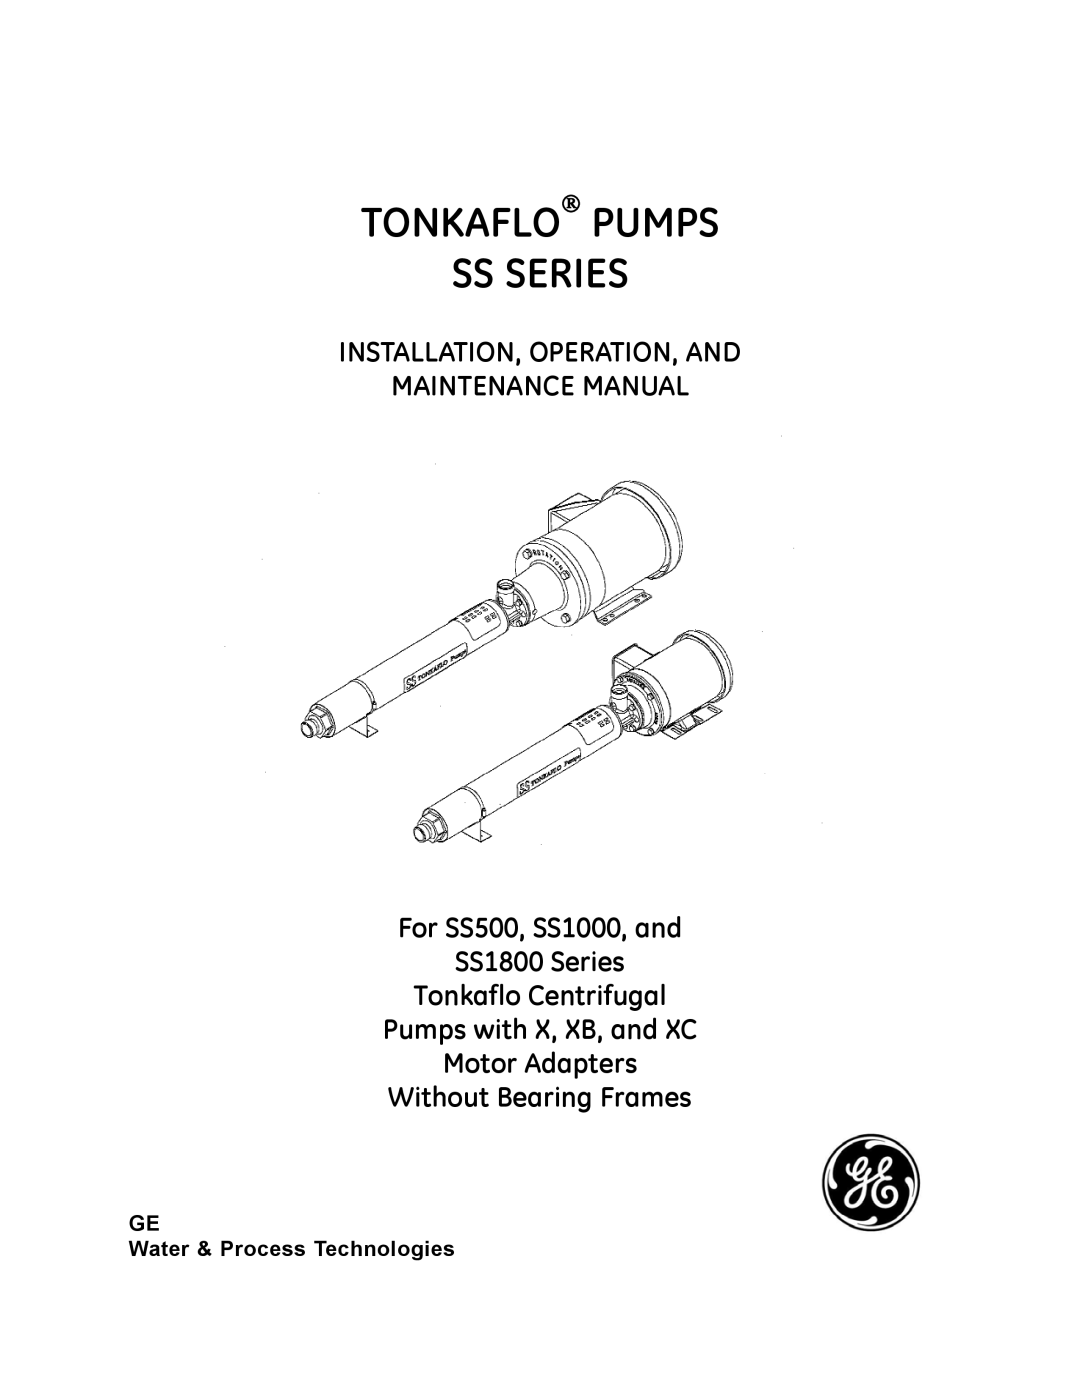 GE manual GE Water & Process Technologies, Tonkaflo Pumps Ss Series, For SS500, SS1000, and SS1800 Series 